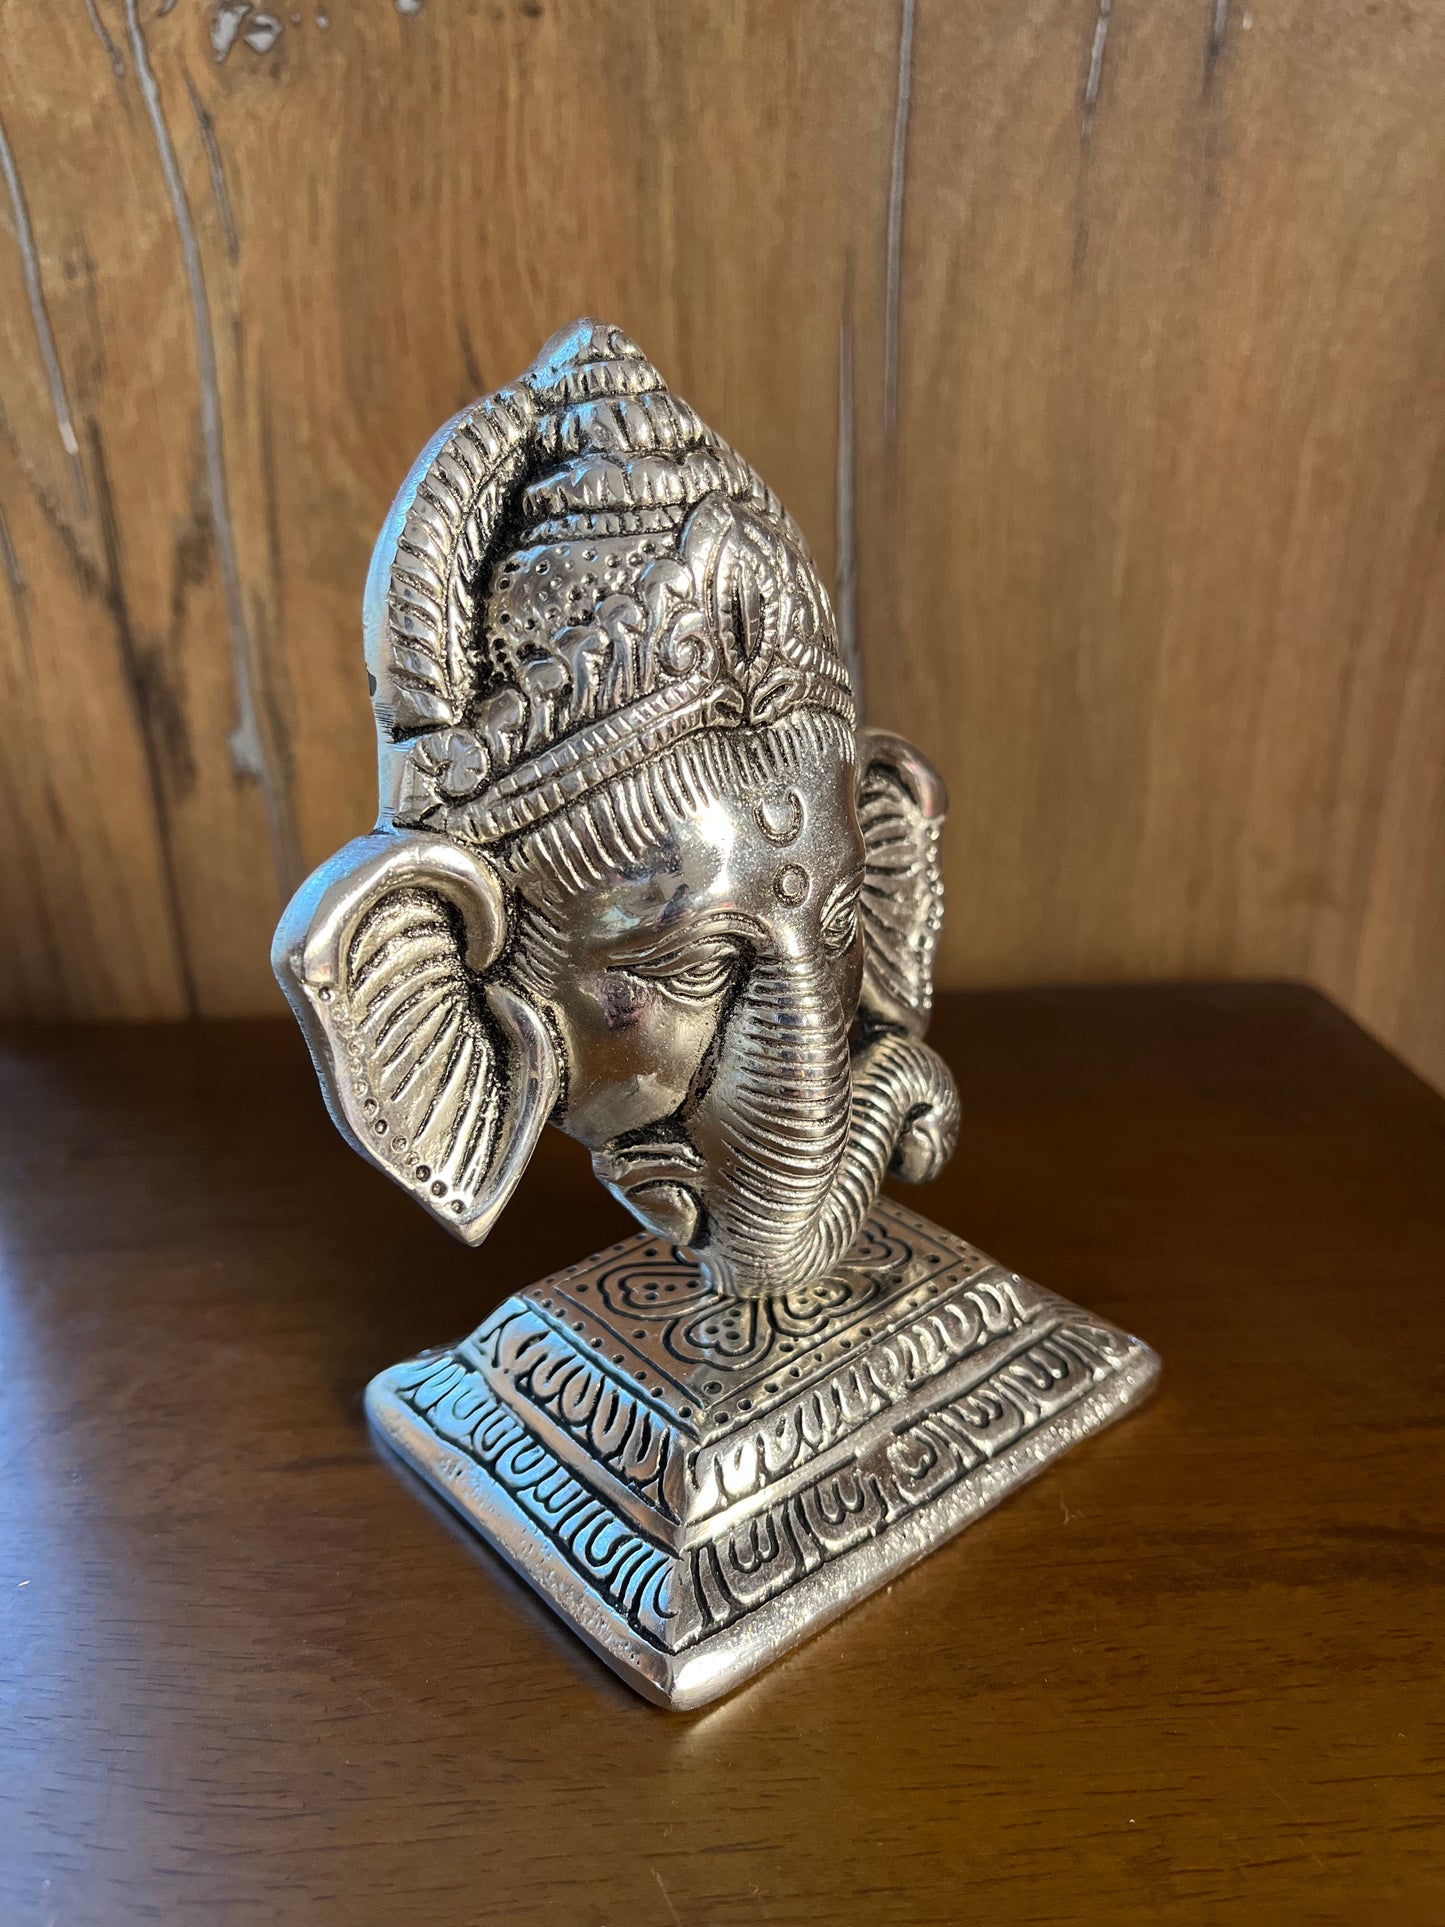 Lord Ganesh idol with Metal Stand